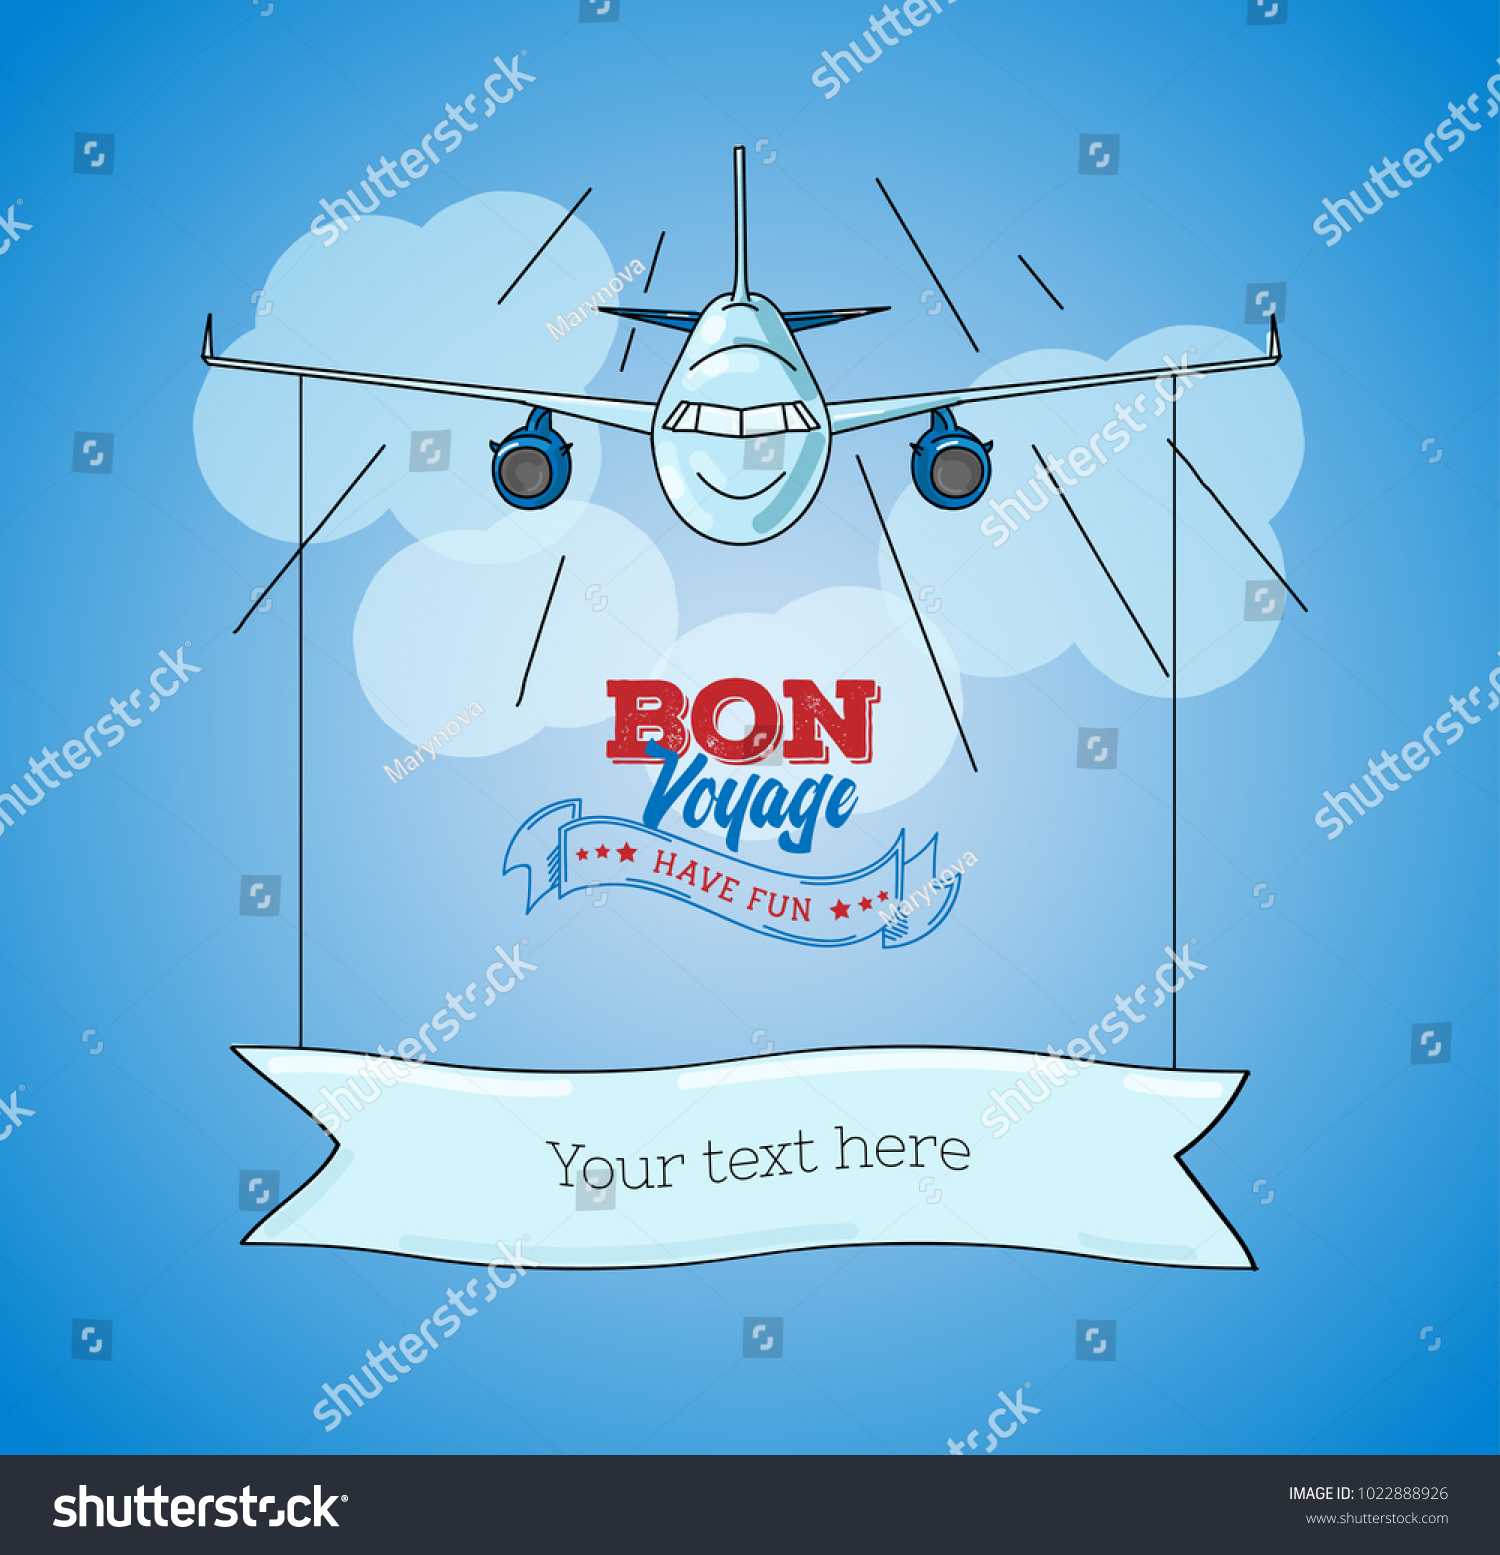 Card Template Plane Graphic Illustration On Stock Vector In Bon Voyage Card Template